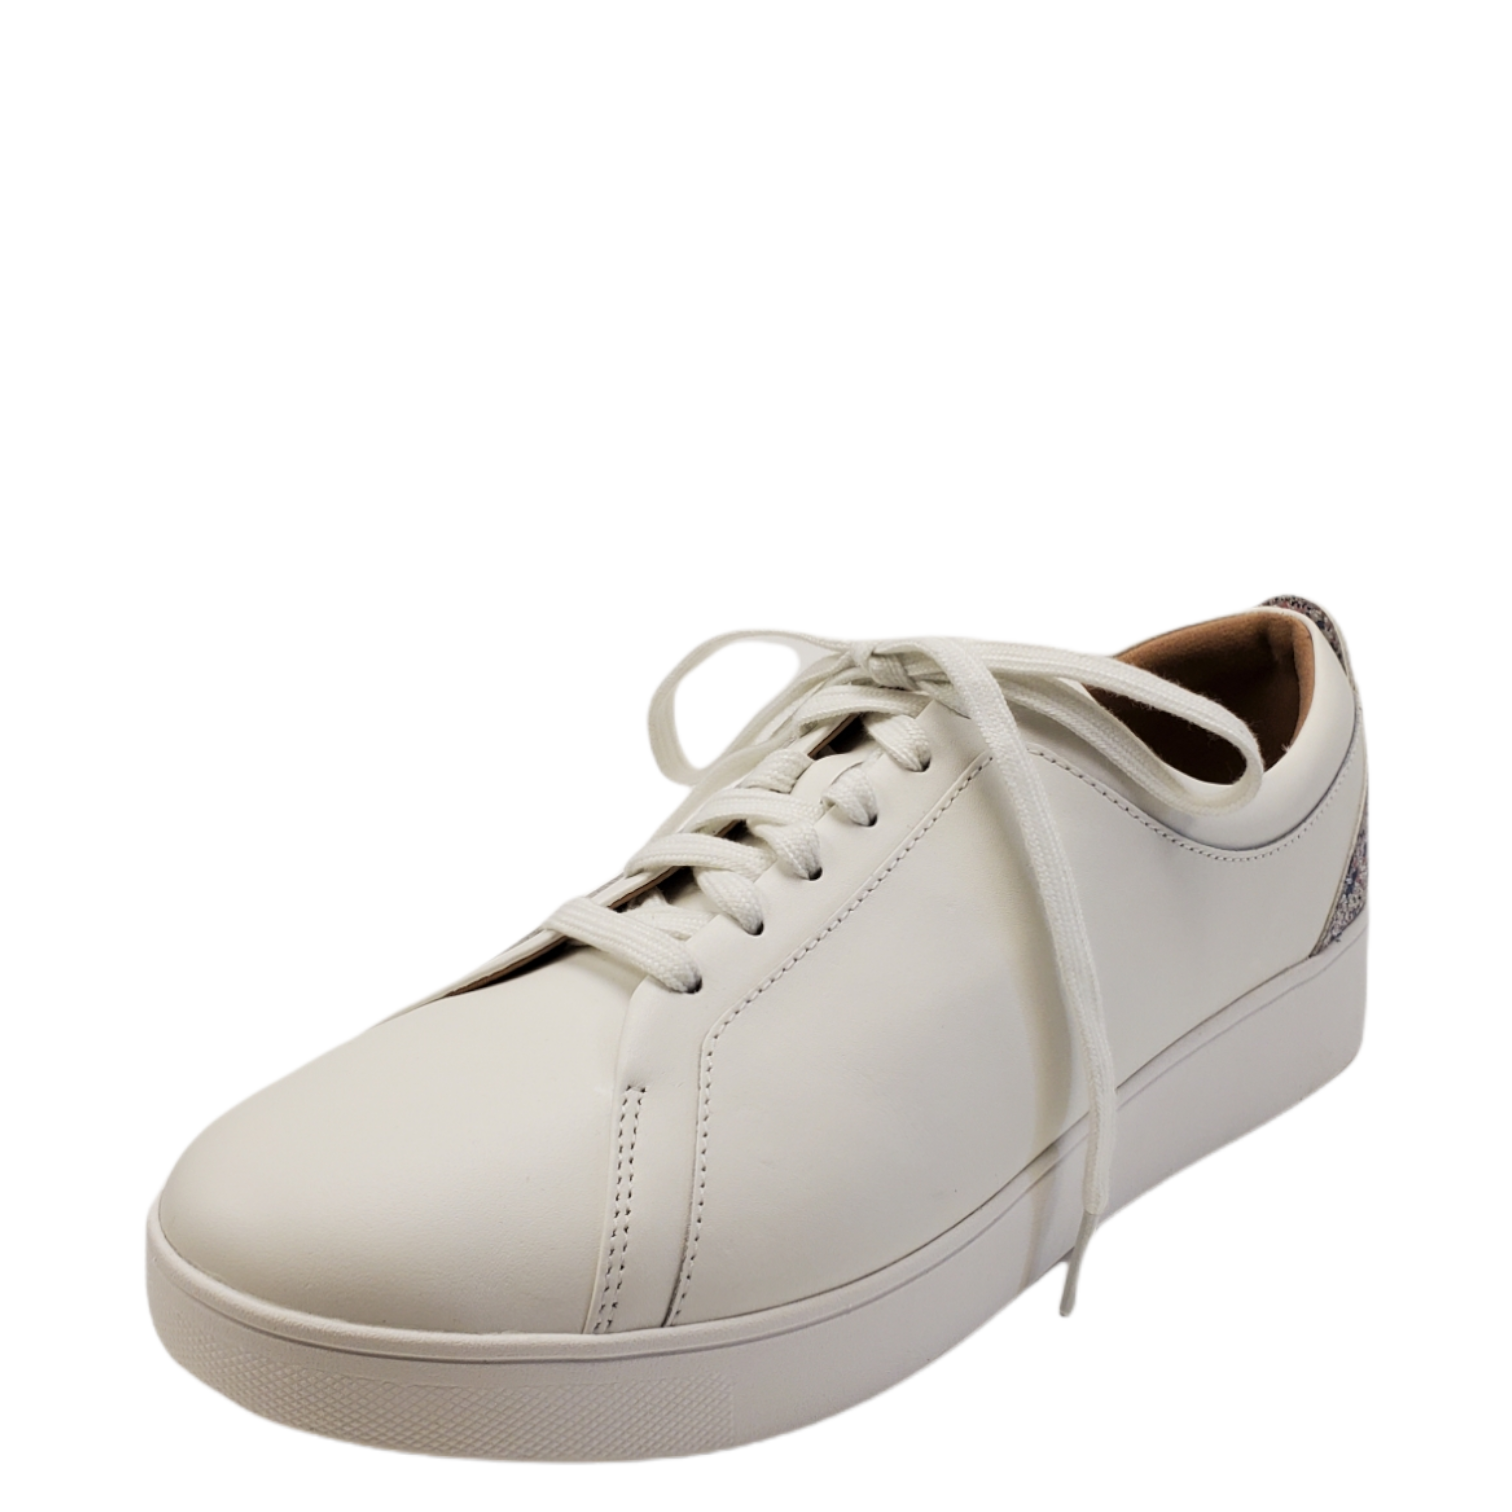 Fitflop FF Supertone Women's US 5 Shoes Sneakers Lace Up 114-001 Leather  White | eBay